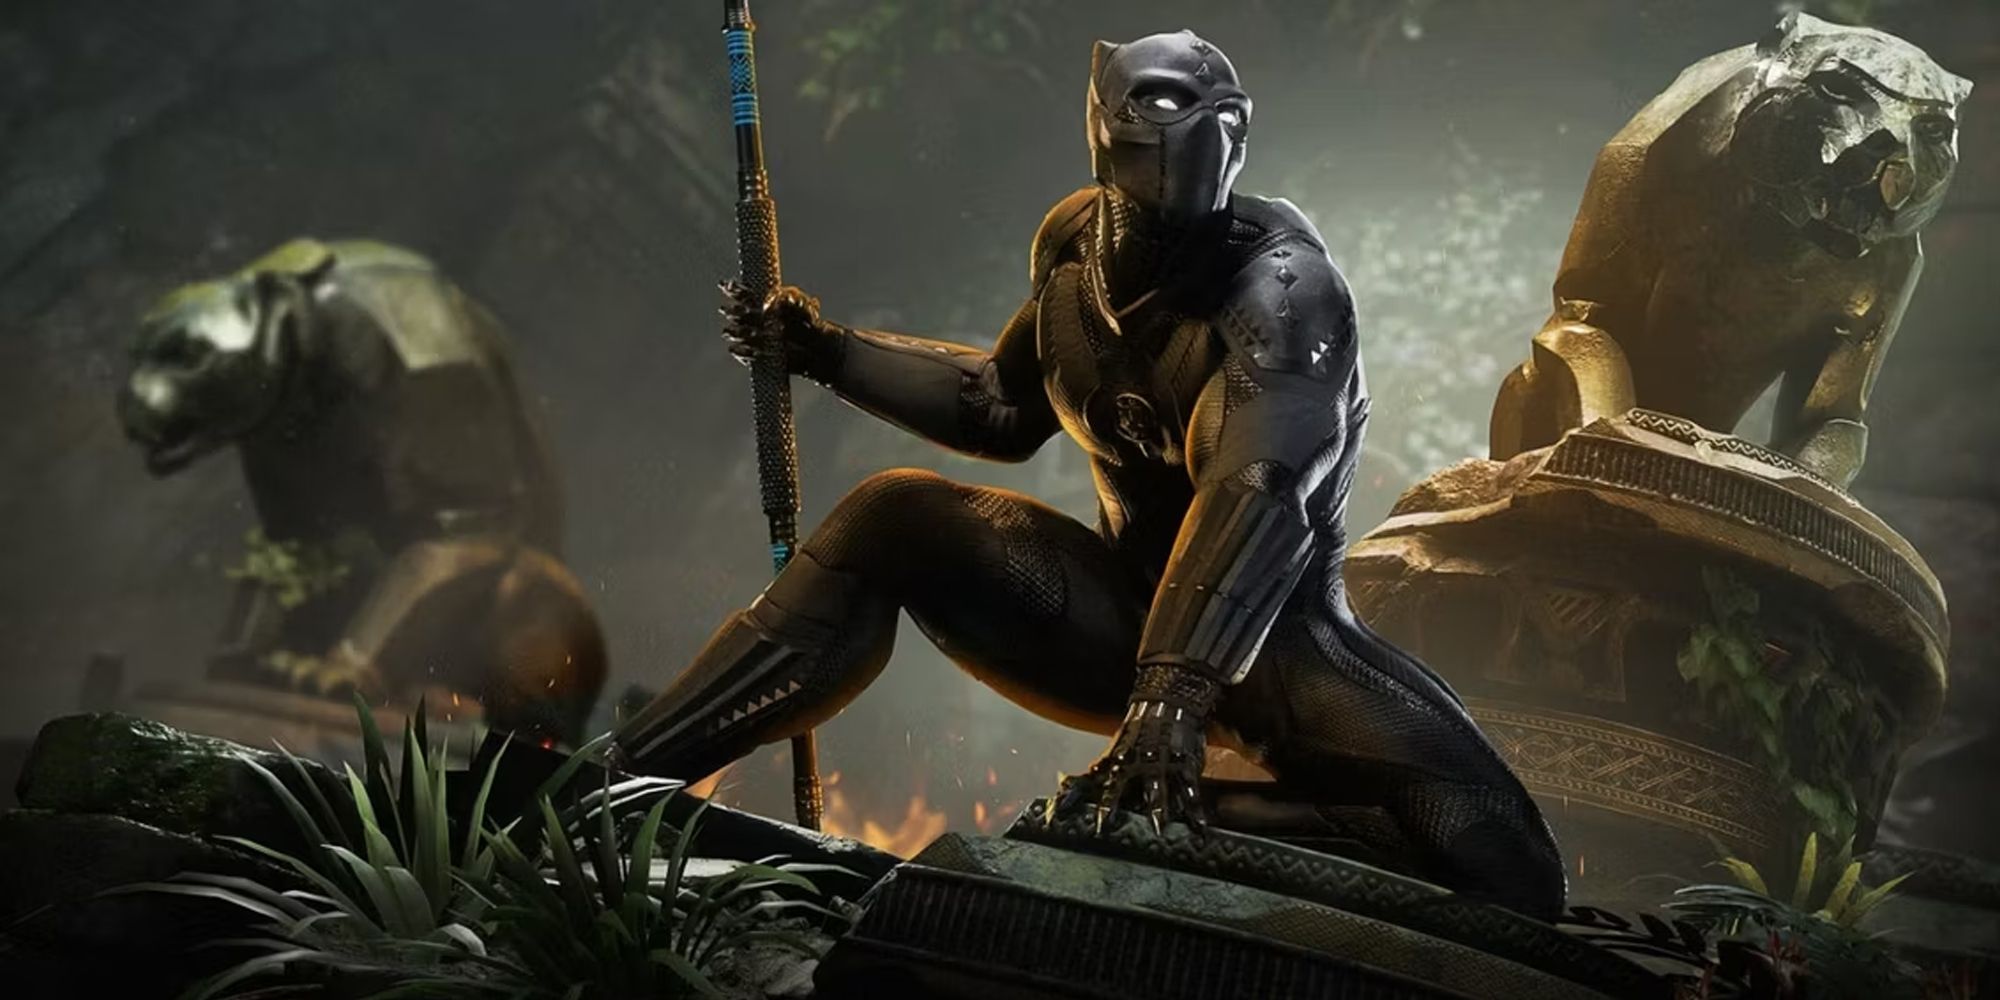 Marvel's Avengers - Black Panther with Panther statues